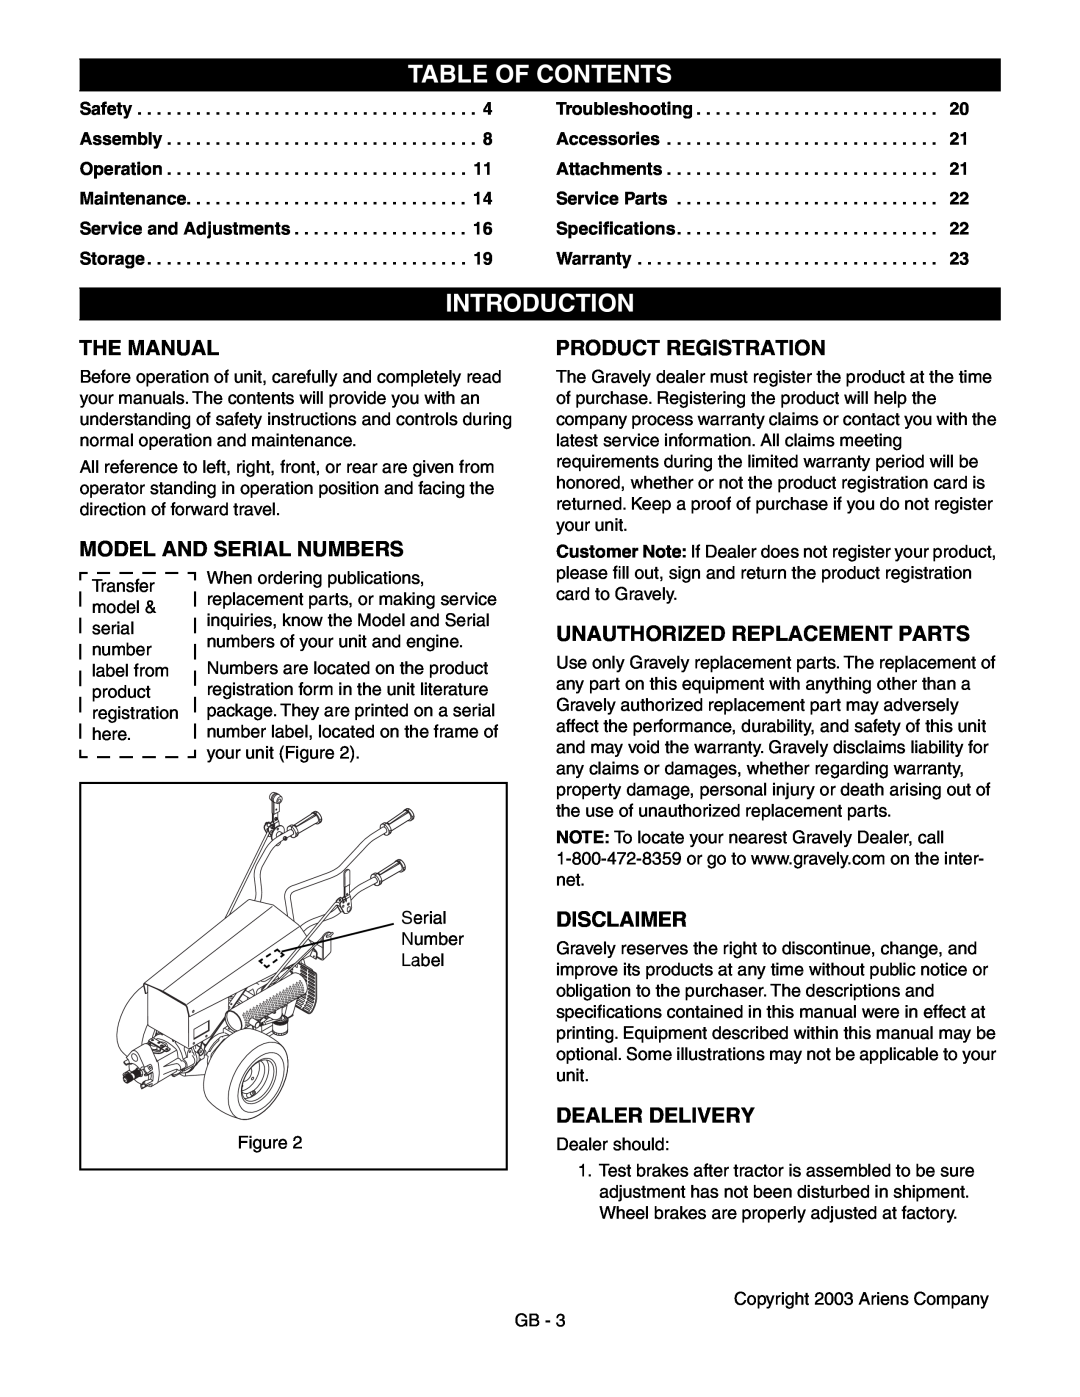 Ariens 985114 Table Of Contents, Introduction, The Manual, Model And Serial Numbers, Product Registration, Disclaimer 